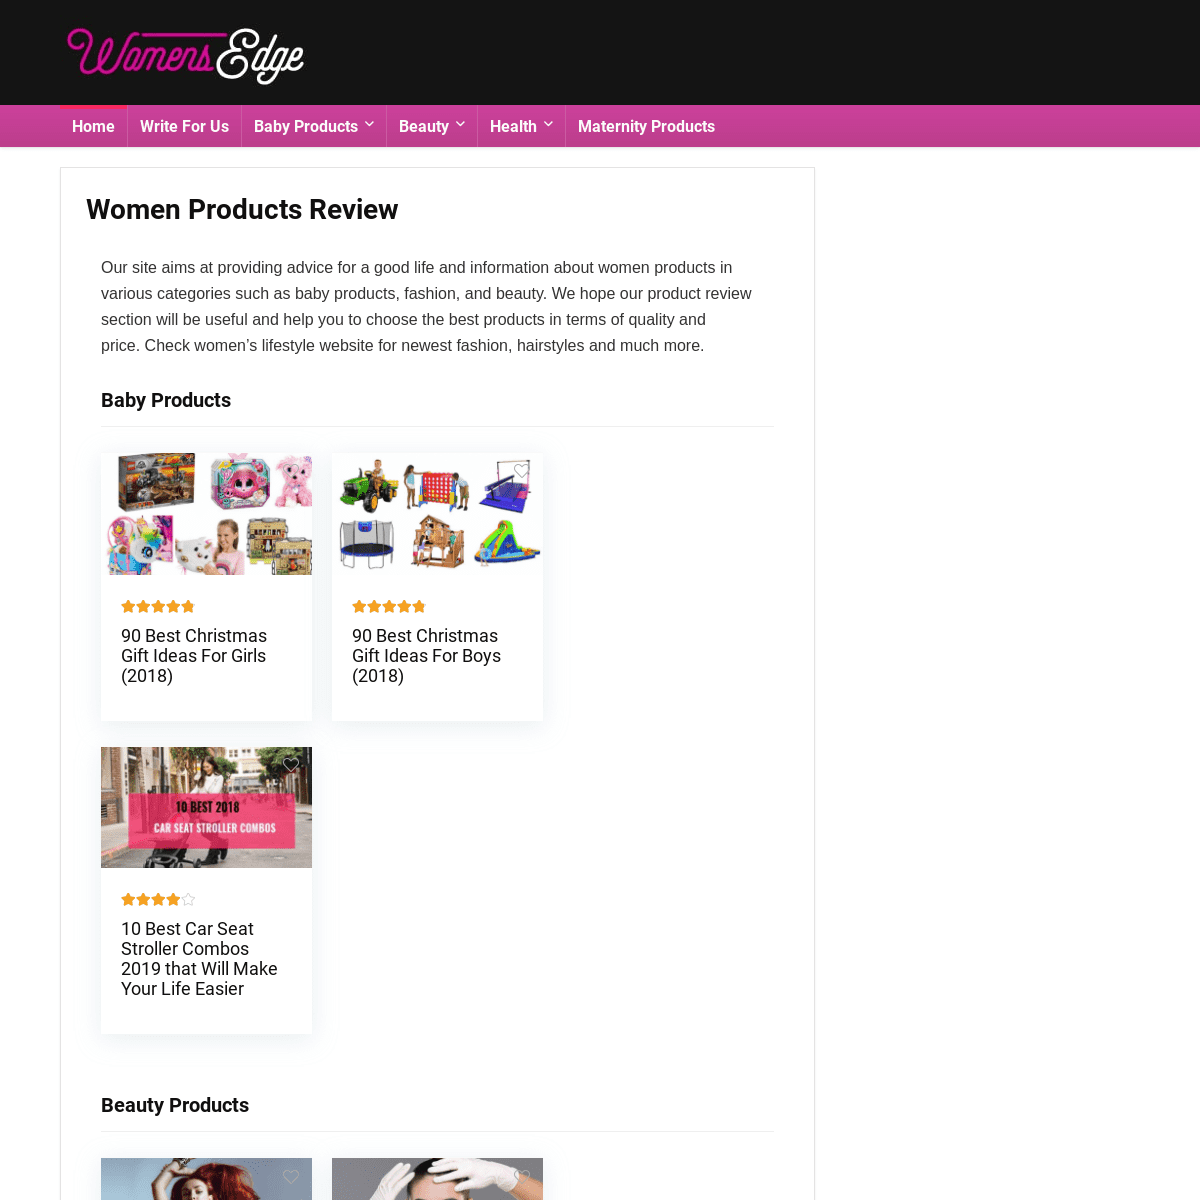 A complete backup of https://womensedge.org